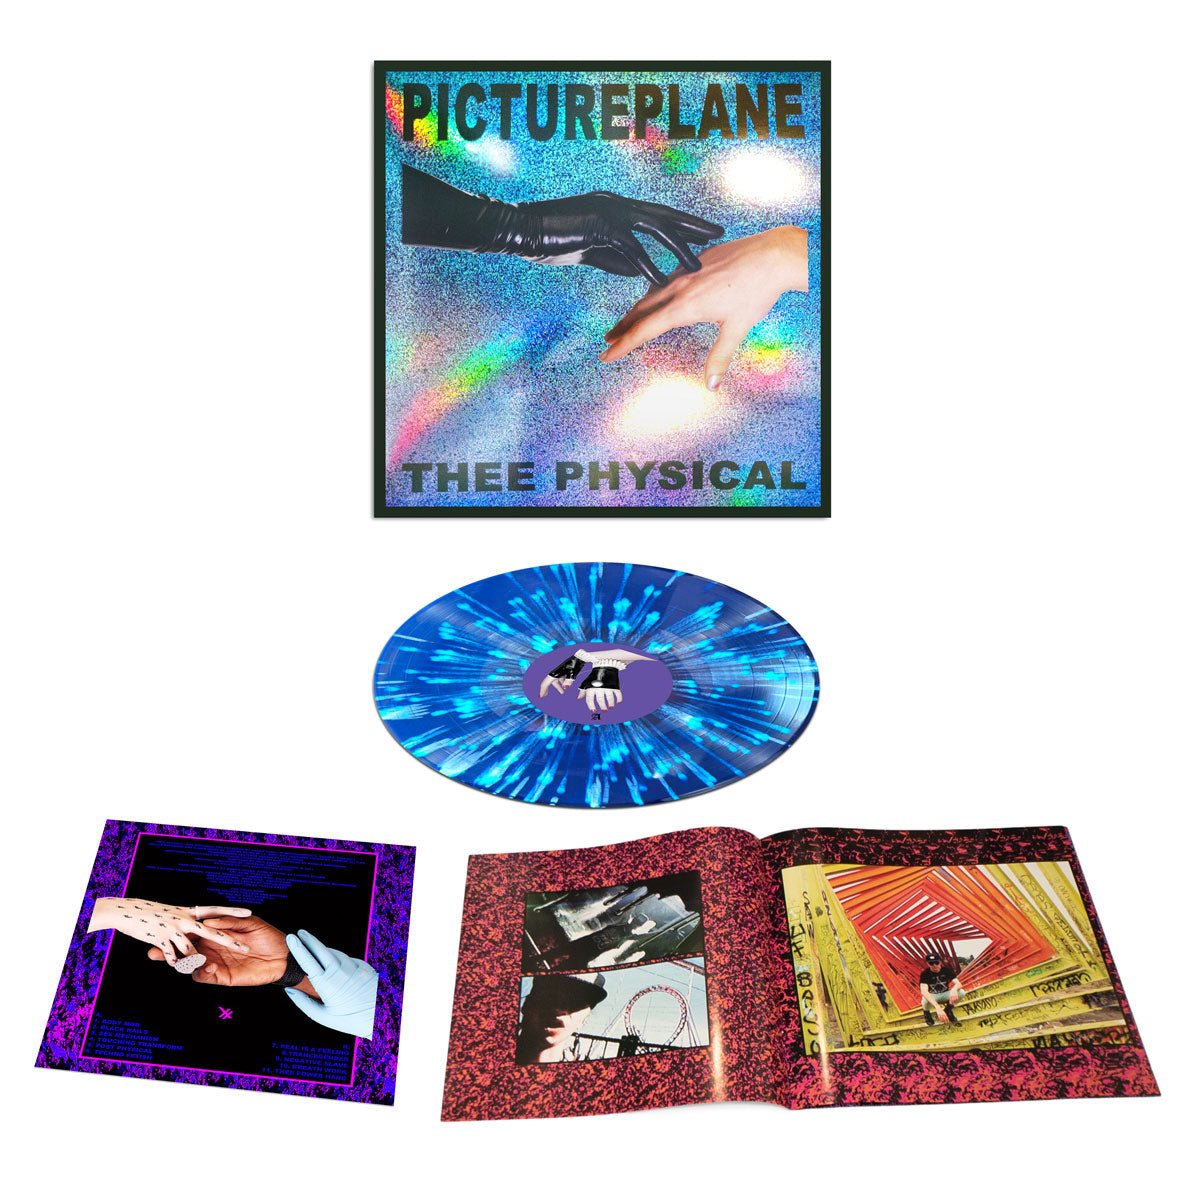 PICTUREPLANE - THEE PHYSICAL LP (Holographic 10 Year Anniversary Blue/White Splatter) - 100% Electronica Official Store (Photo 3)